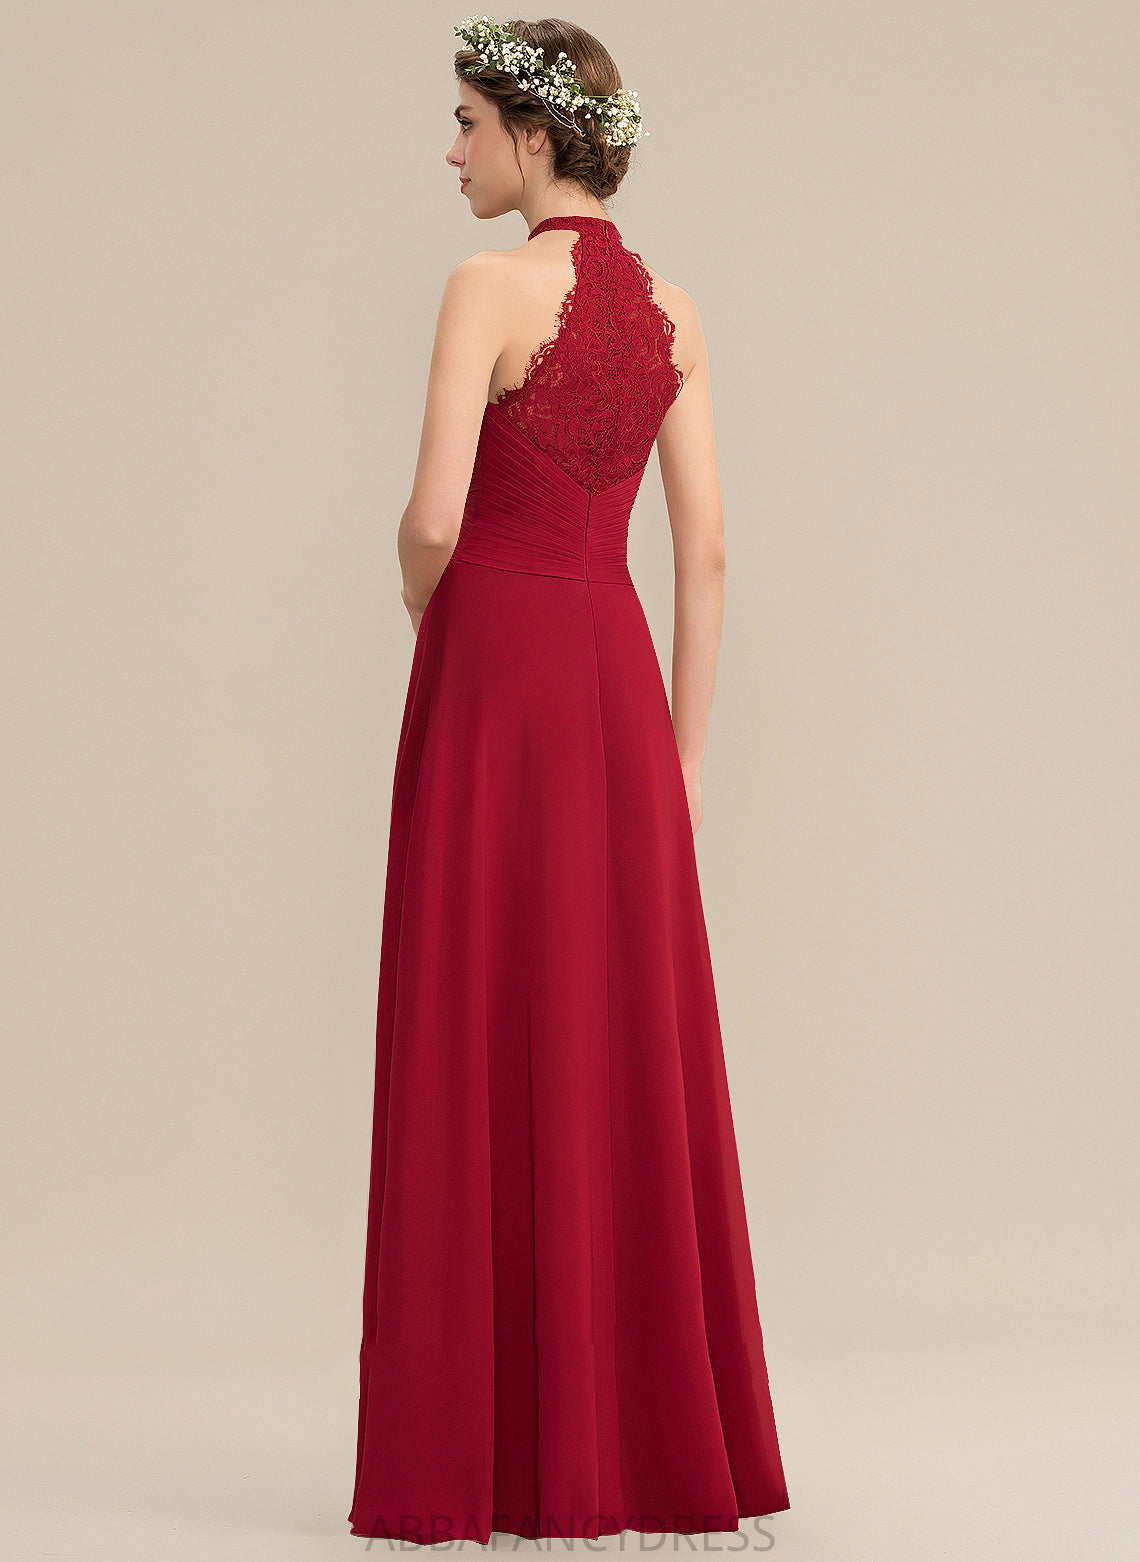 Split Floor-Length With High Front Neck Lace Prom Dresses A-Line Chiffon Ruffle Danielle